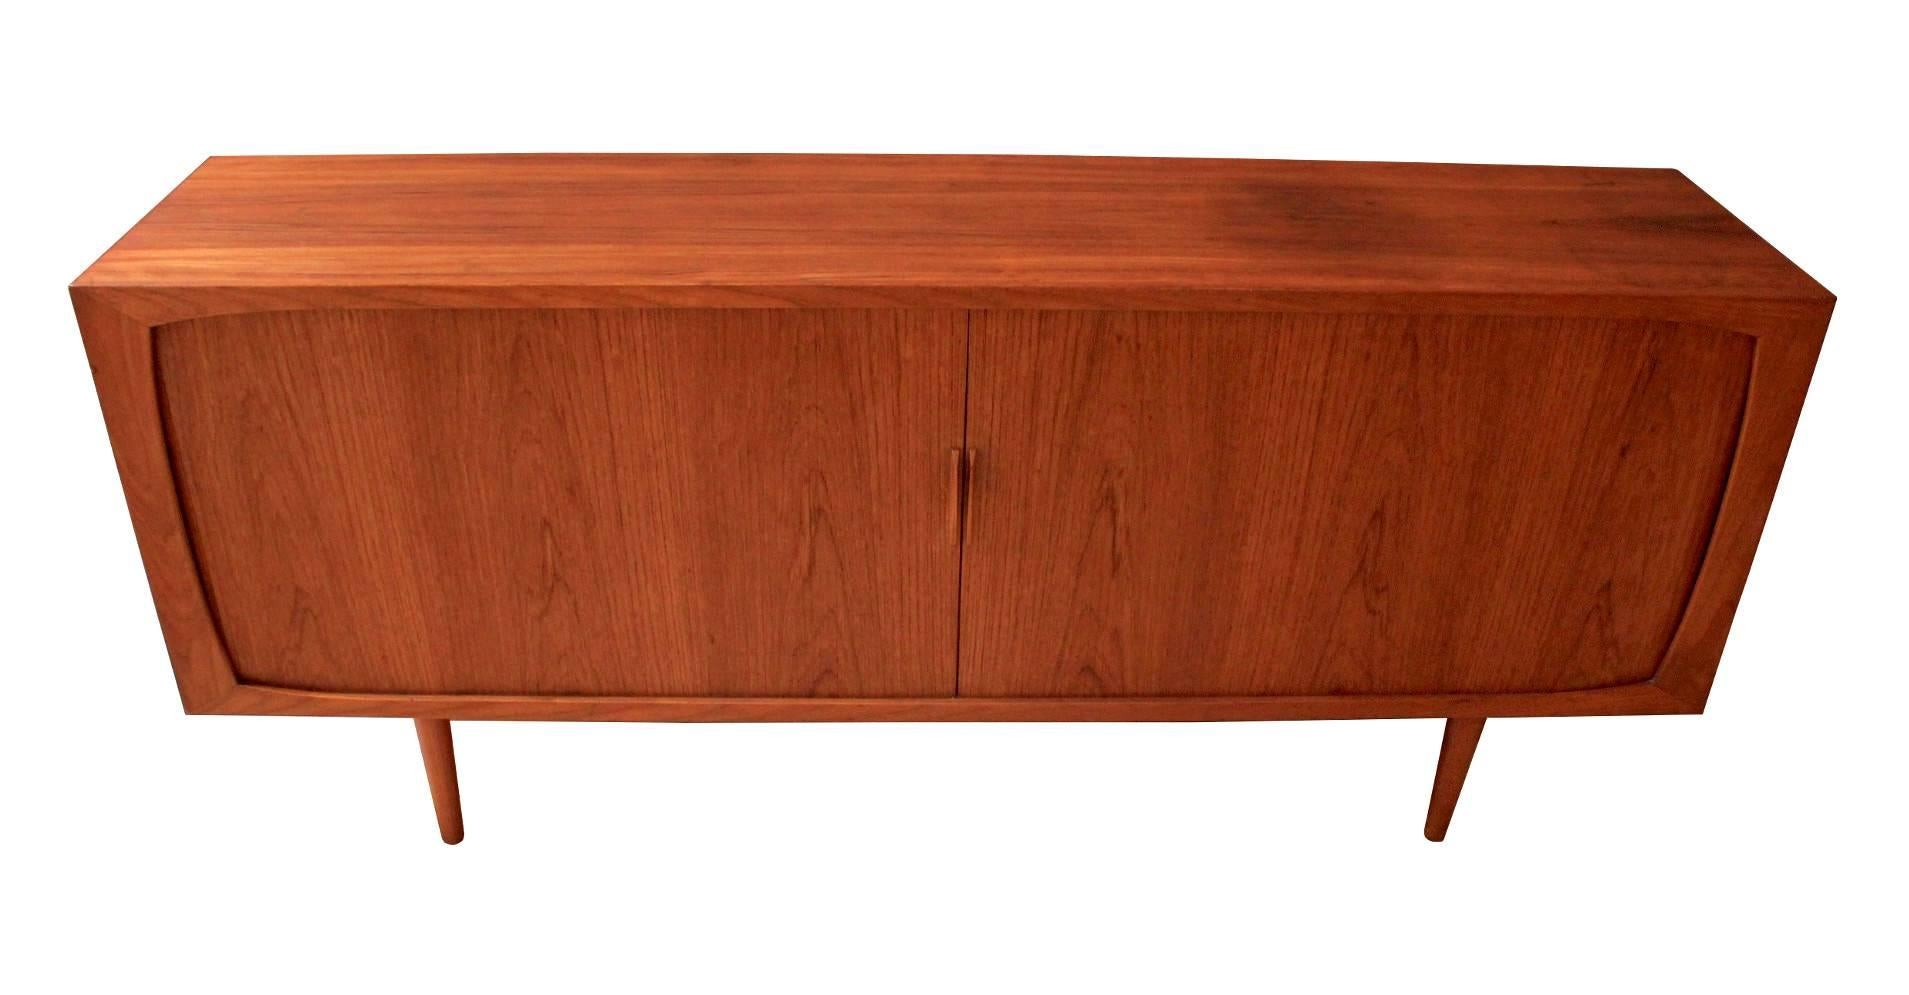 1960s Danish Modern teak credenza or buffet with tambour doors. Credenza has three adjustable shelves and a large central storage compartment.